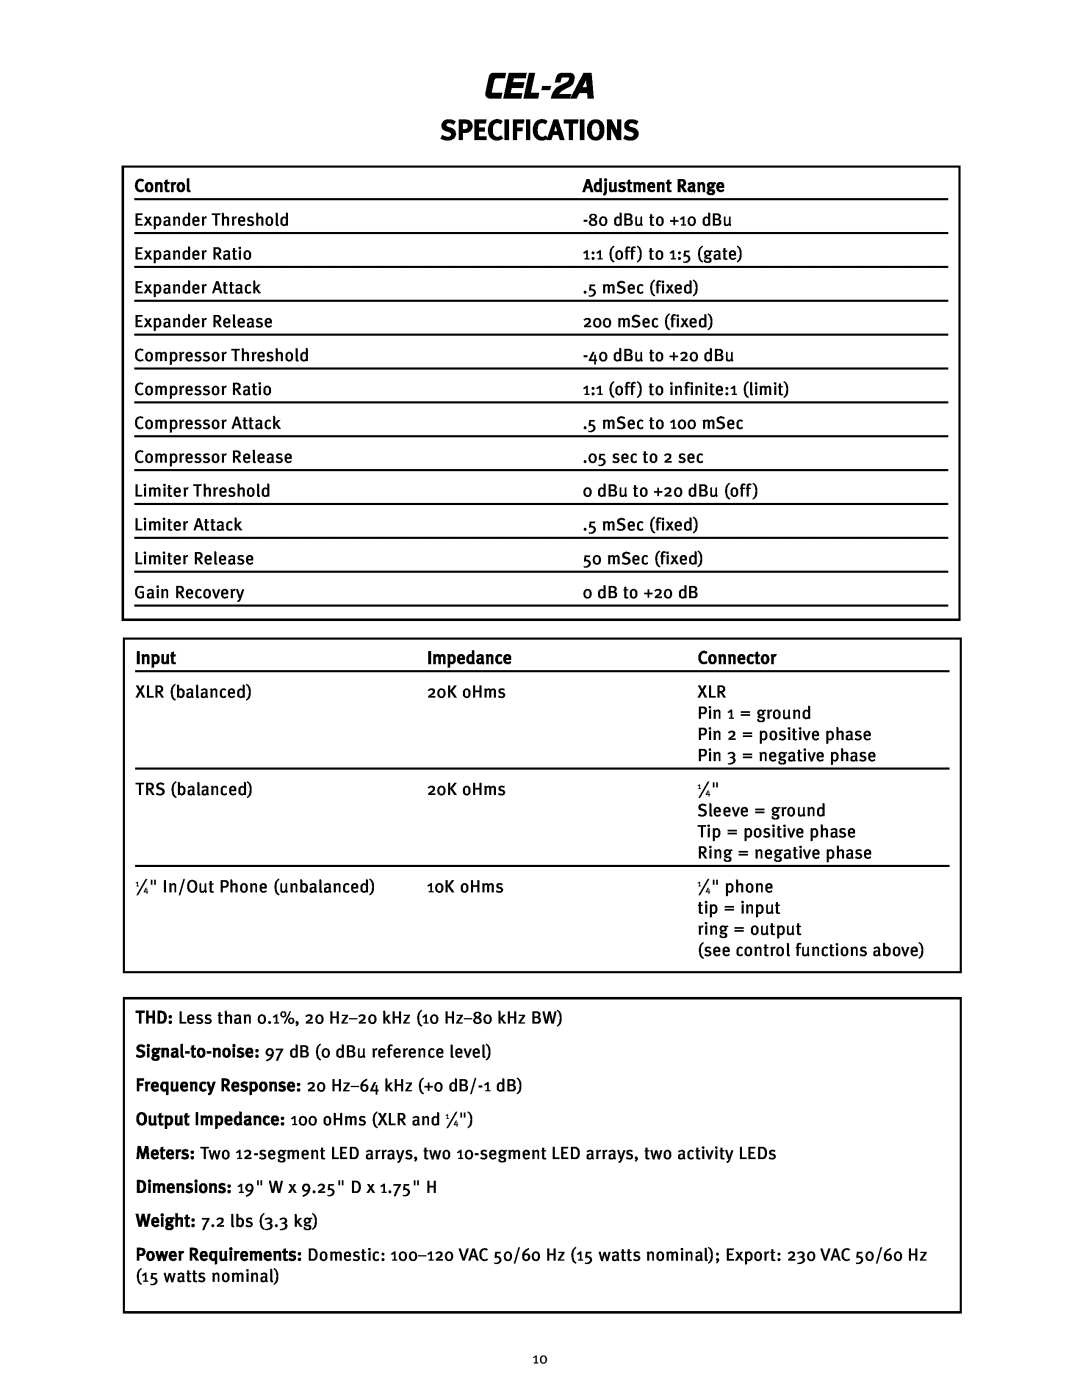 Peavey CEL-2A manual Specifications 